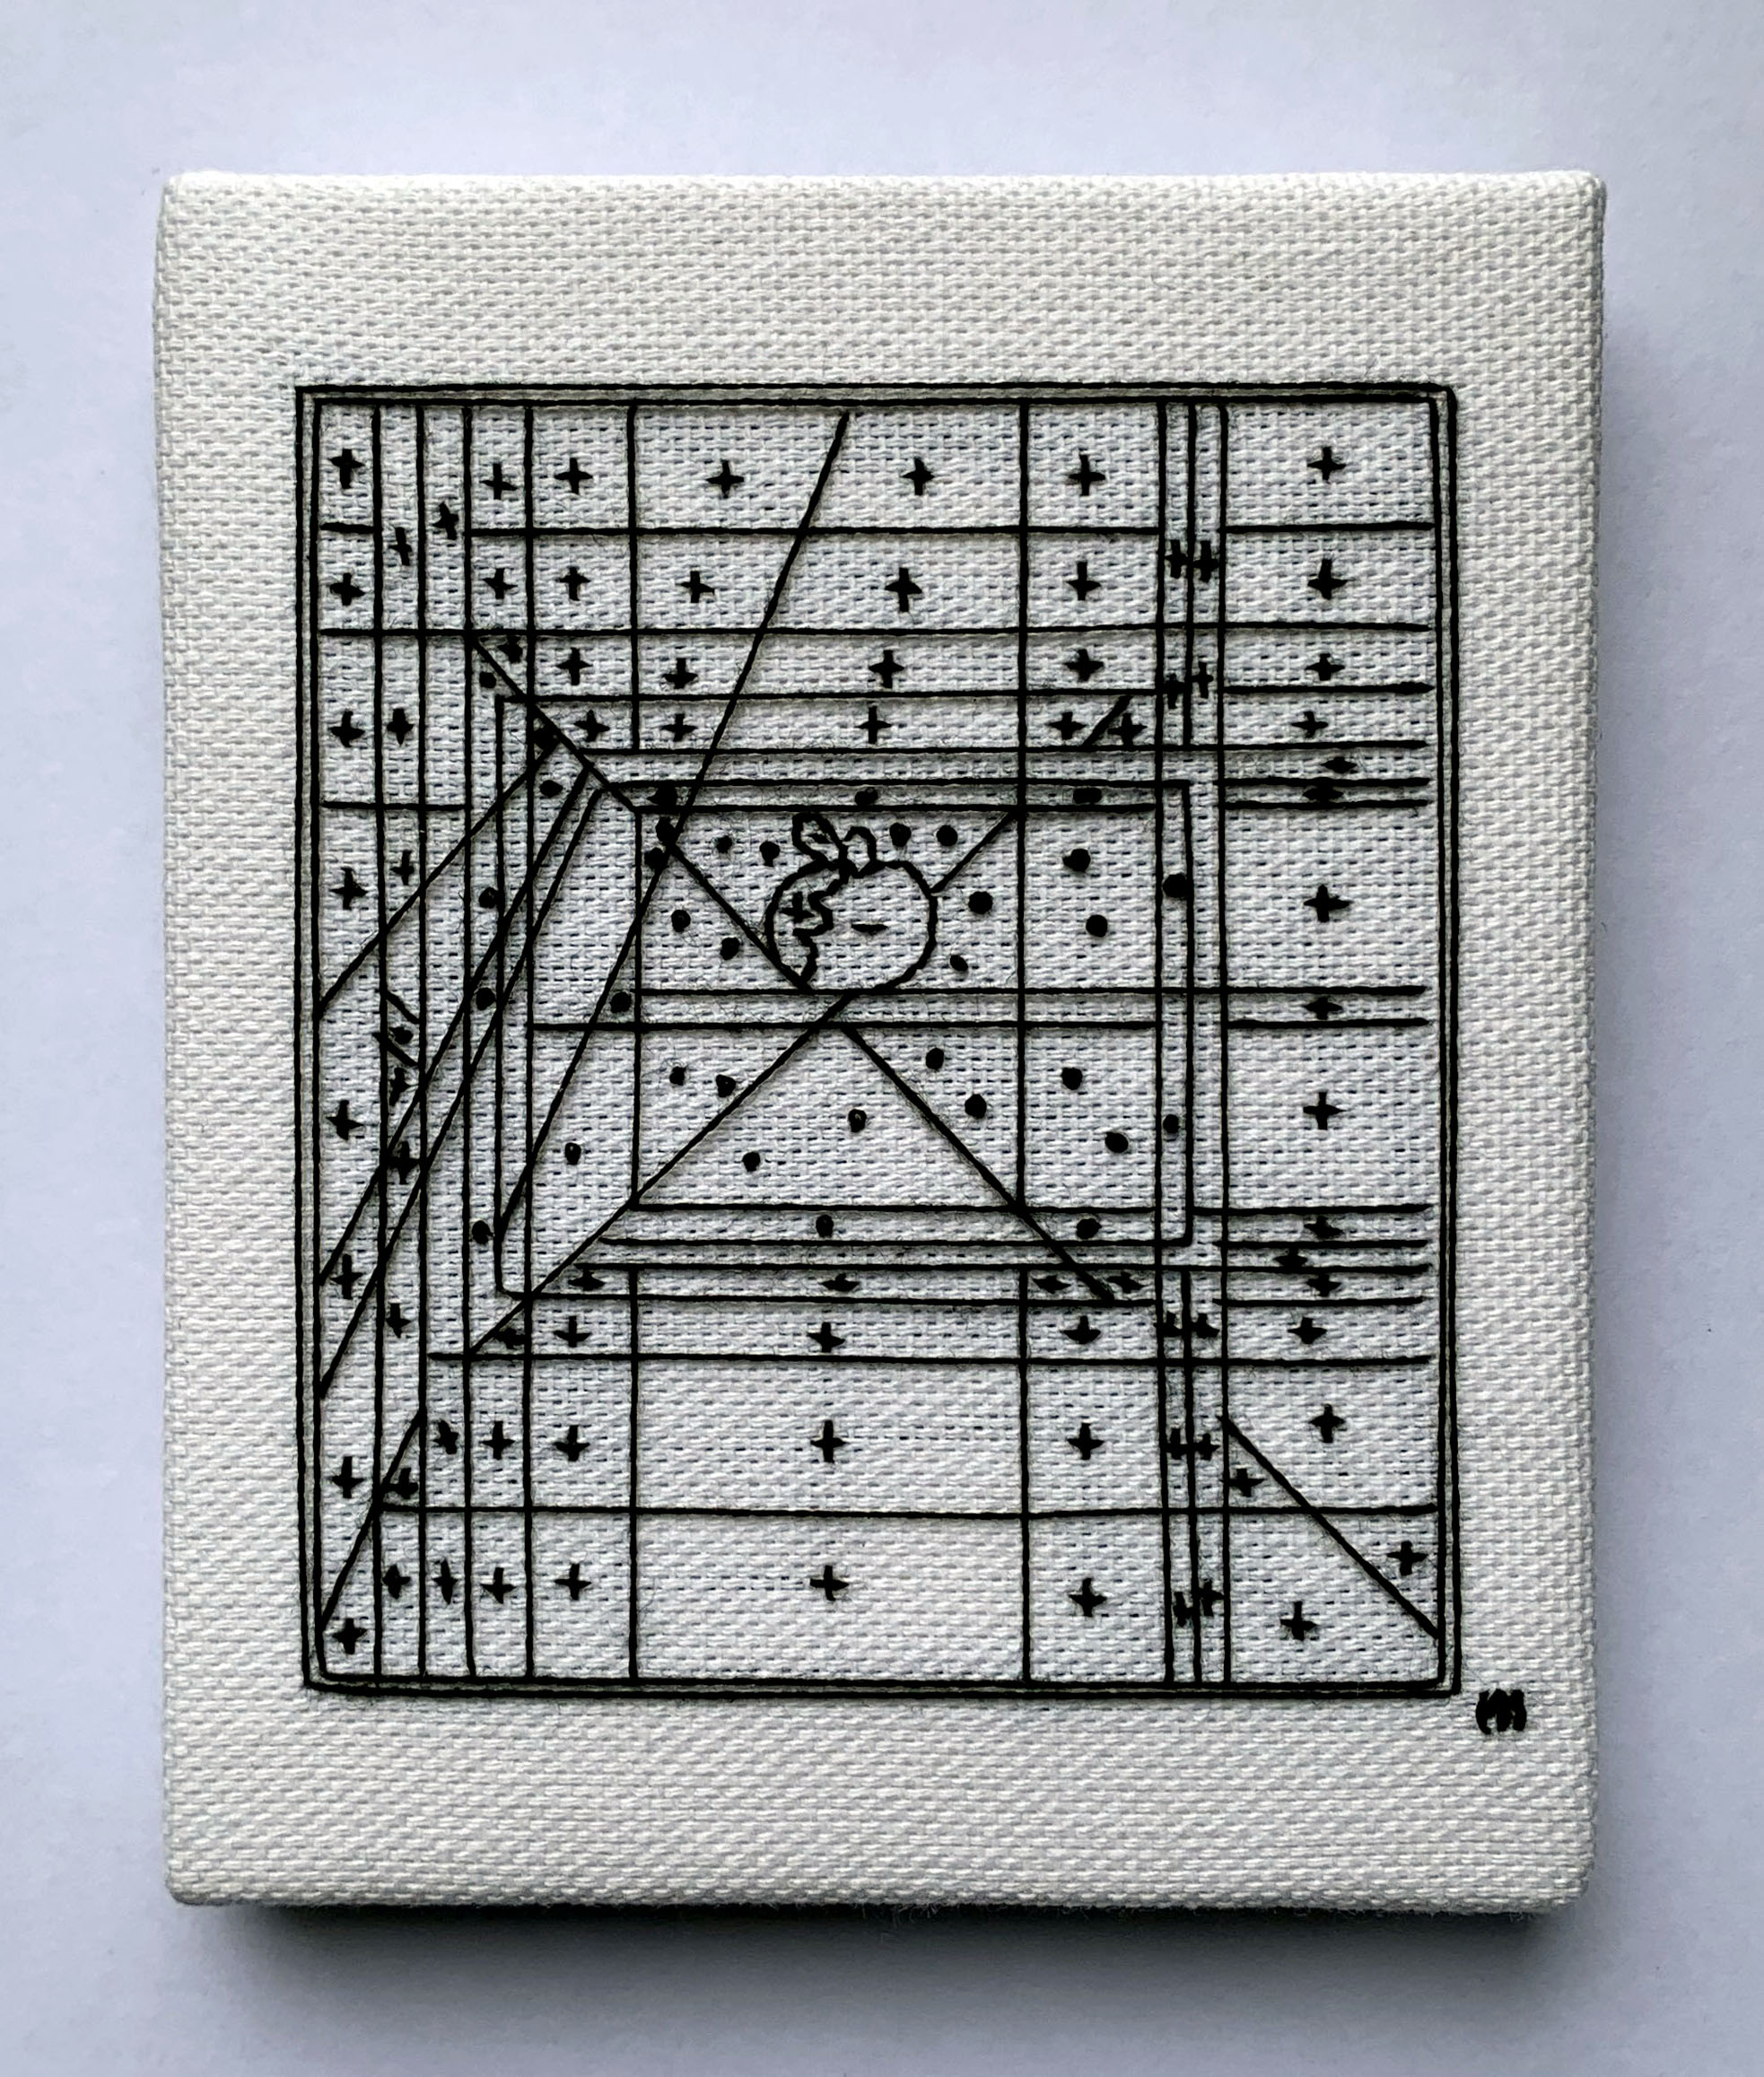  / Embroidery of a “Humo-color” drawing from the comic strip Placid and Muzo 183, in paperback. Art by artist Marine Beaufils.